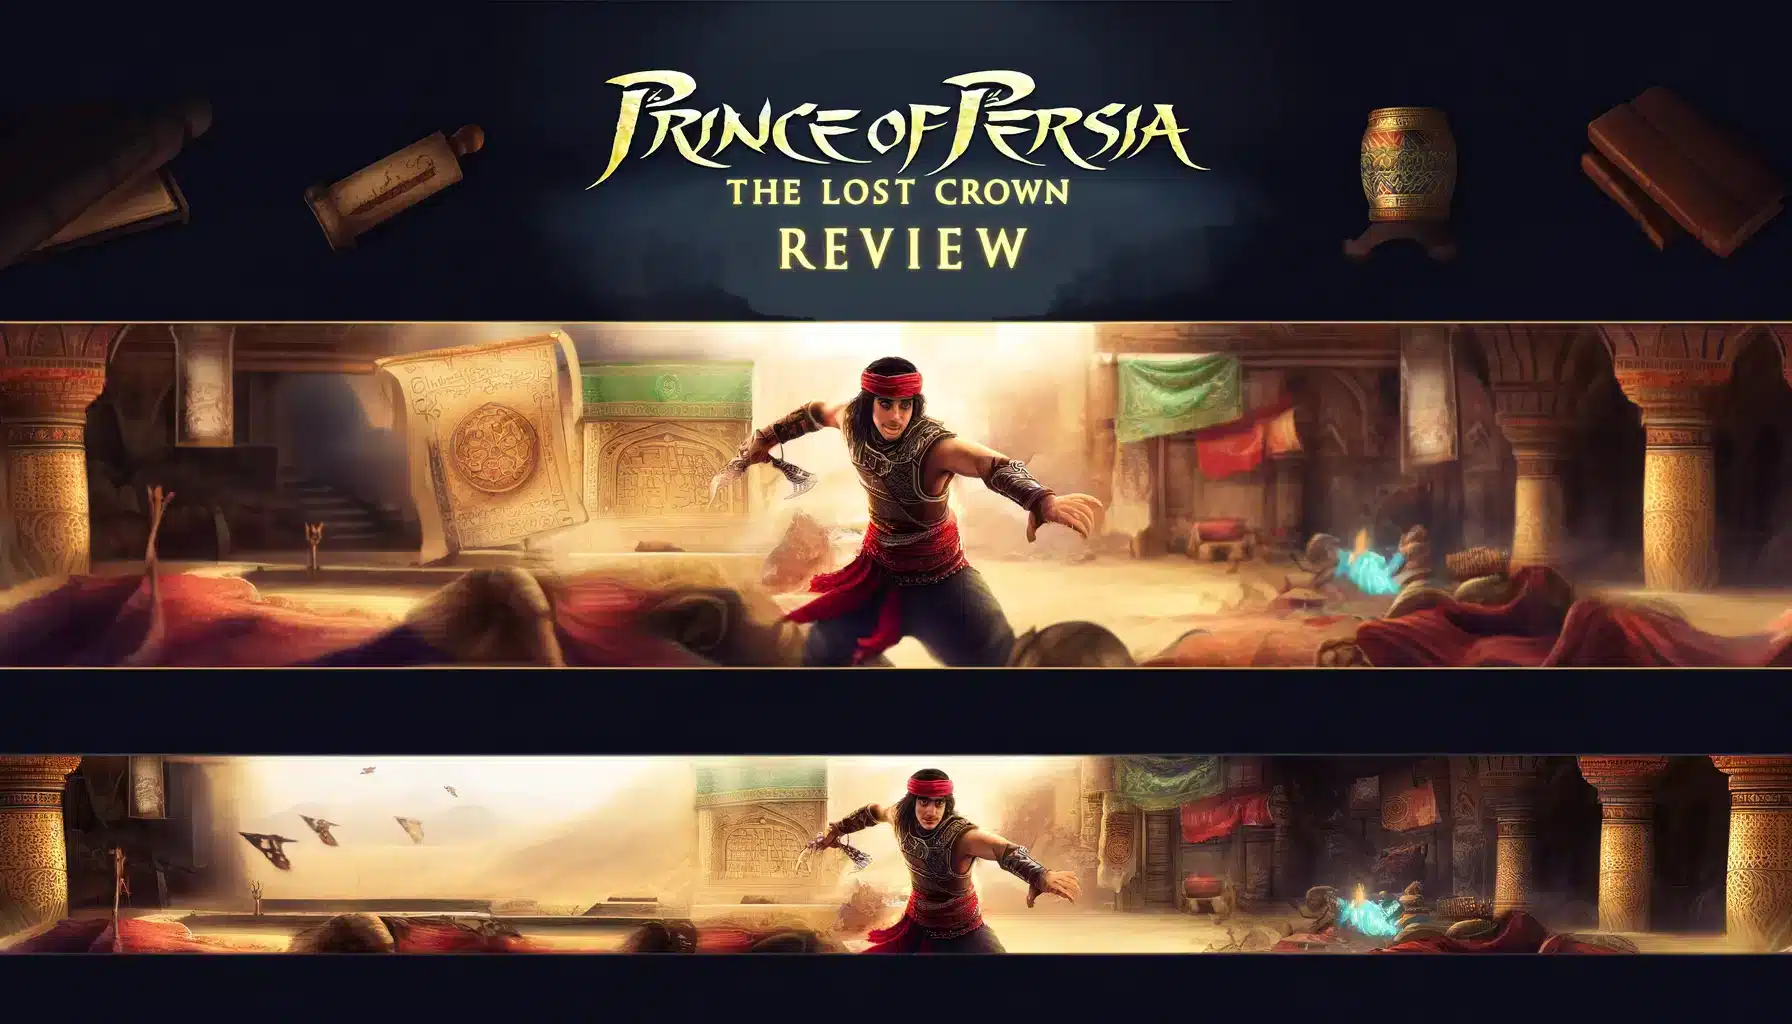 Prince of Persia the Lost Crown Review